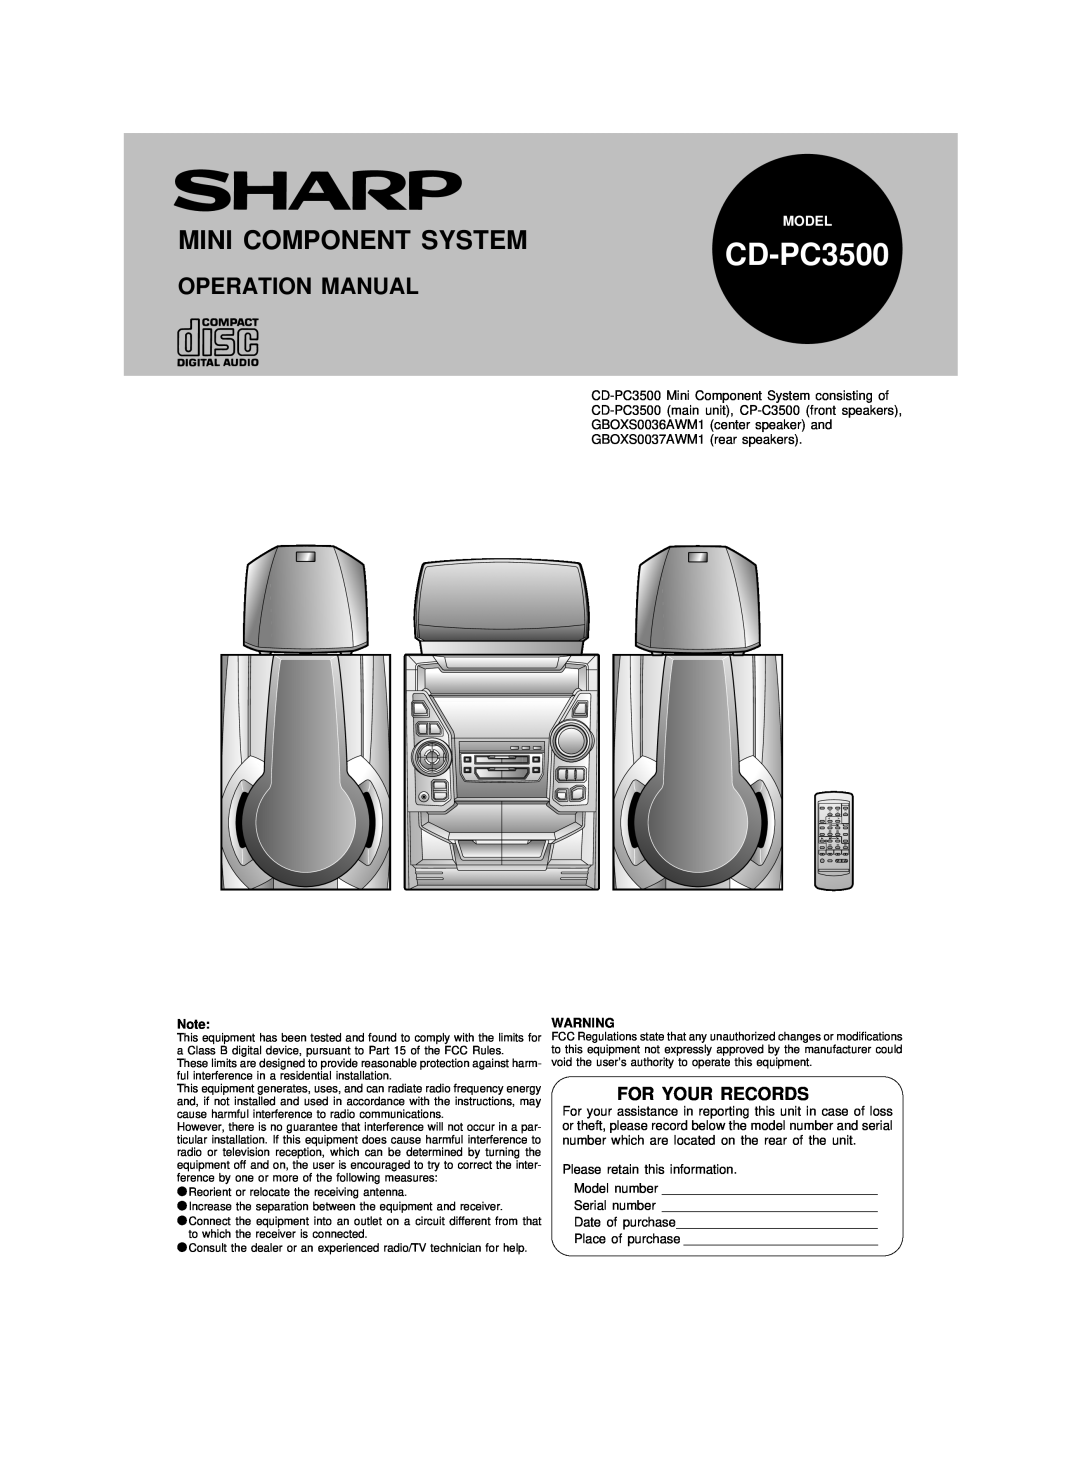 Sharp CDPC3500 operation manual For Your Records, CD-PC3500, Mini Component System, Model 